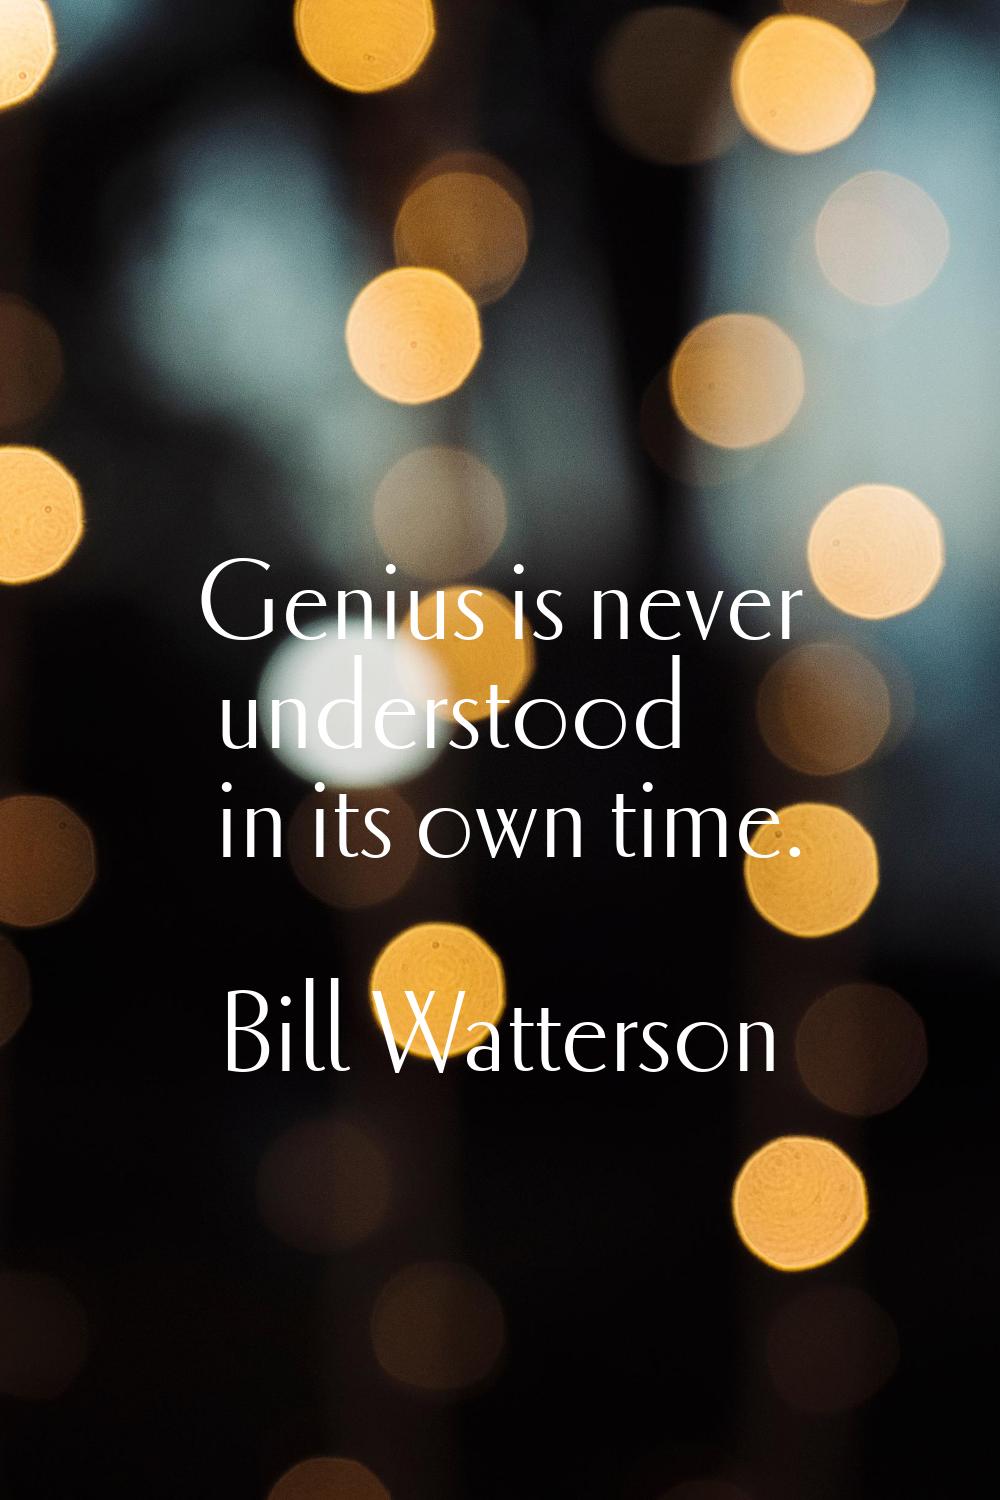 Genius is never understood in its own time.